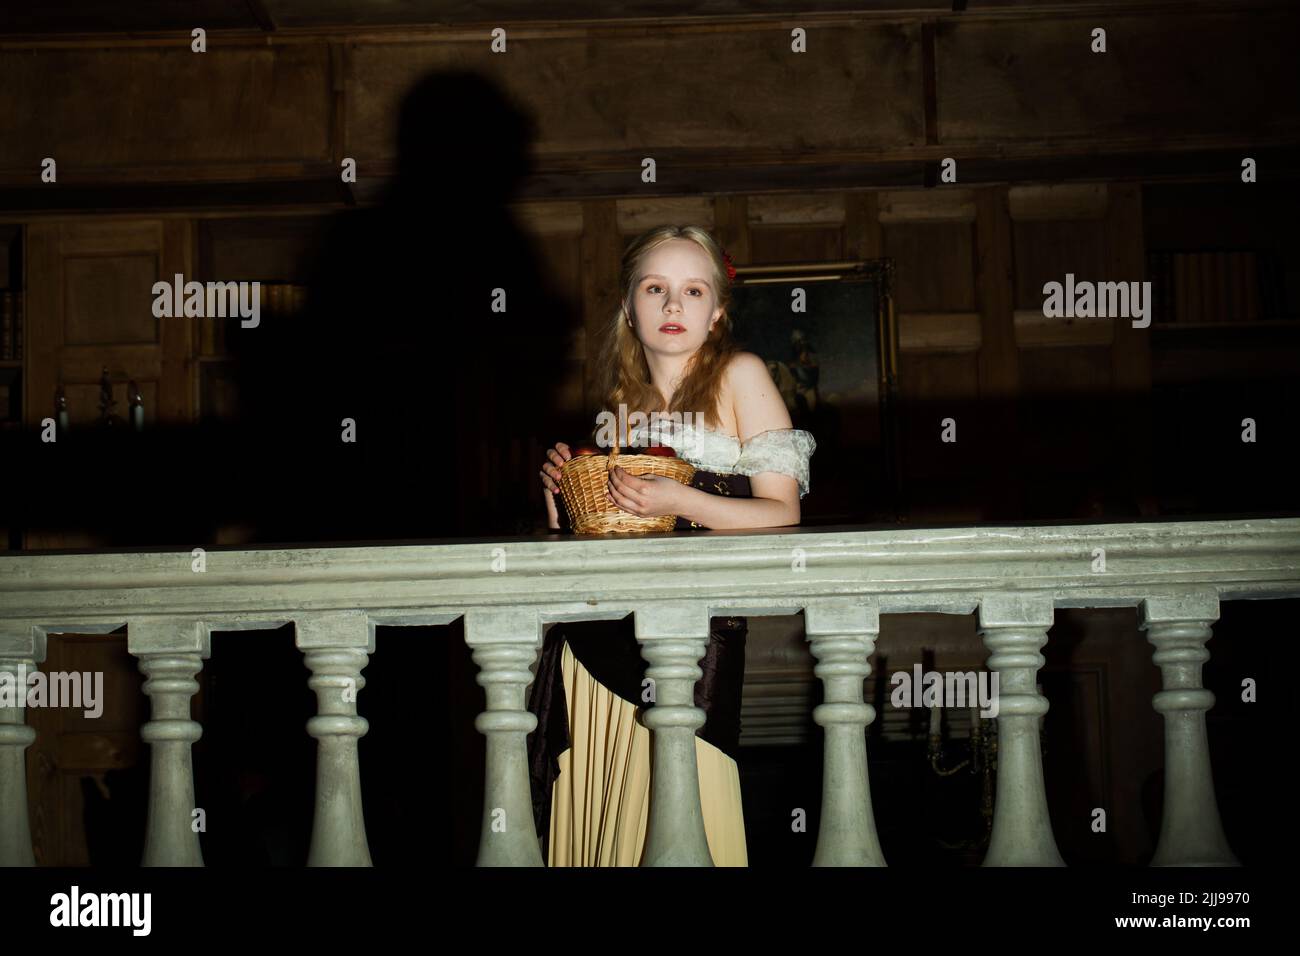 Actress woman in stage light on the balcony Stock Photo